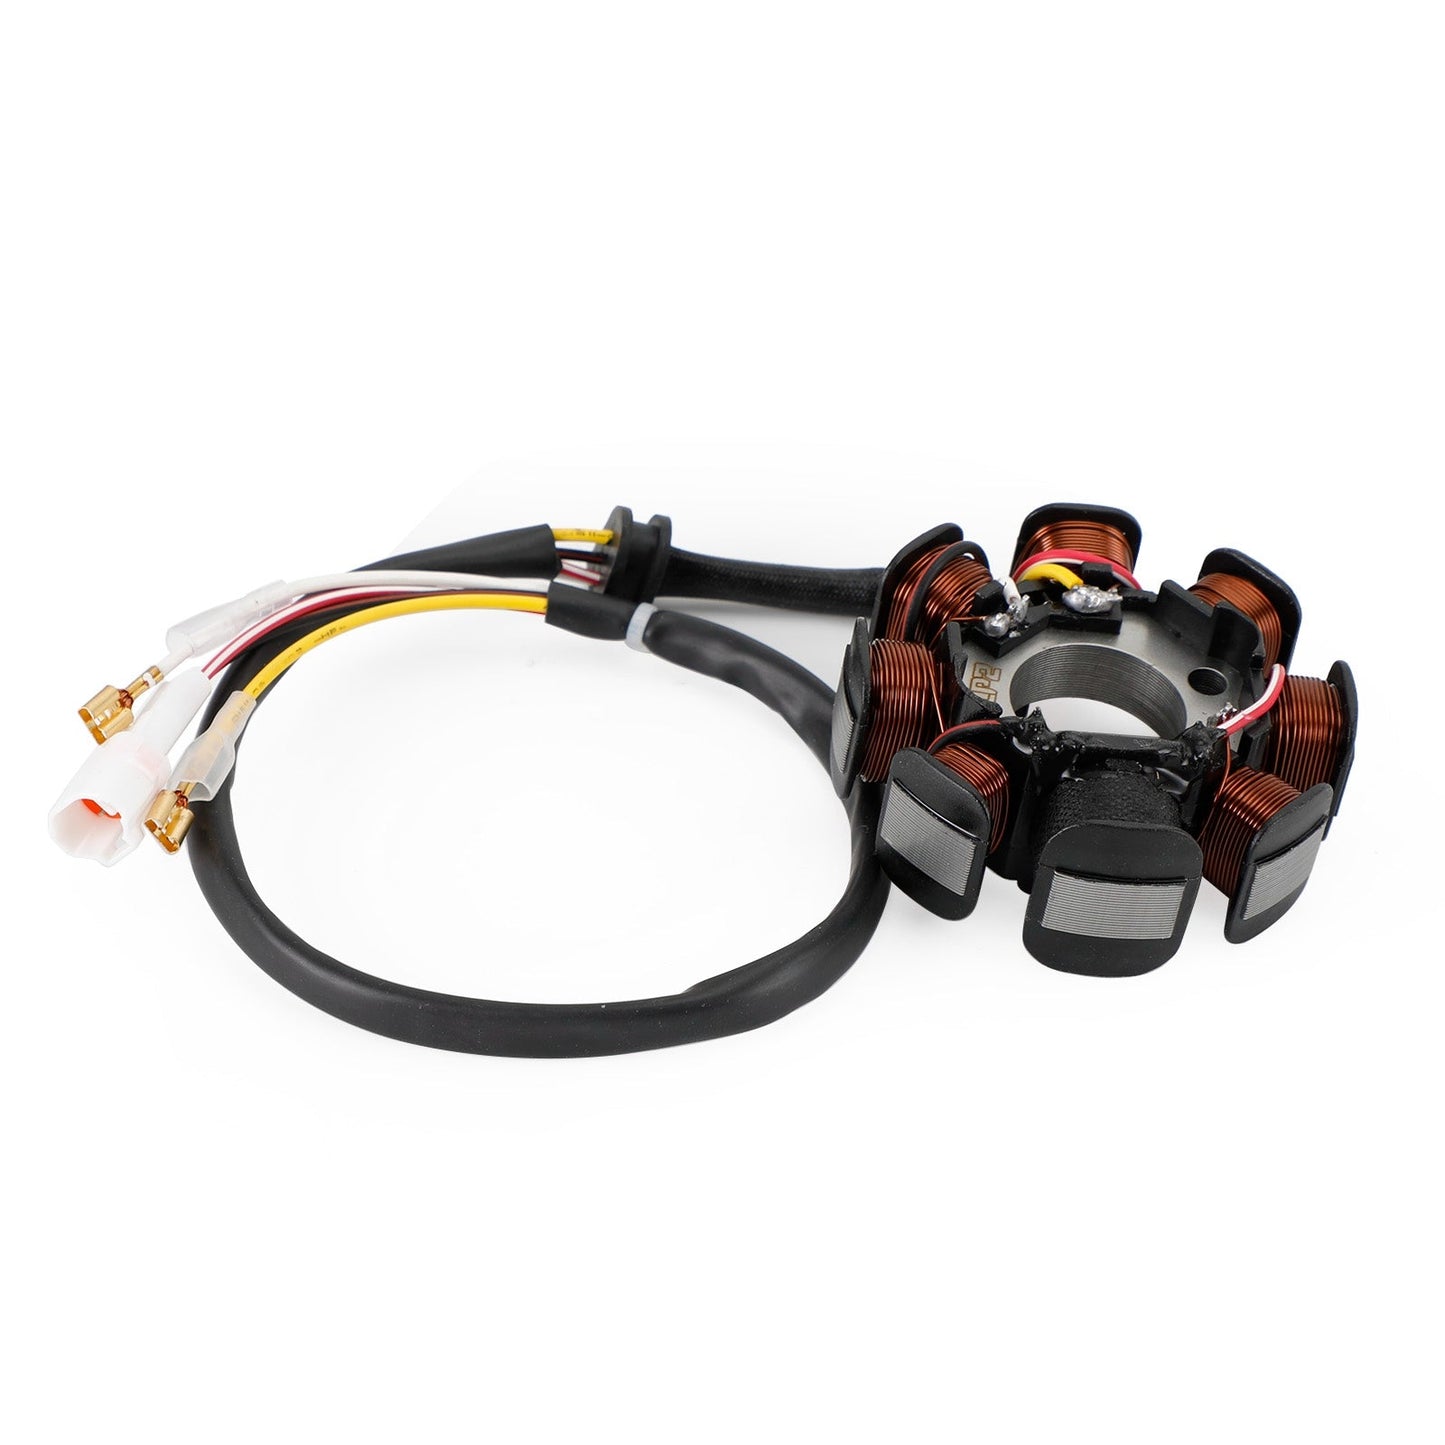 2006-2011 XC-F XCF-W EXC-F 250 Magnéto Stator + Redresseur de Tension + Joint